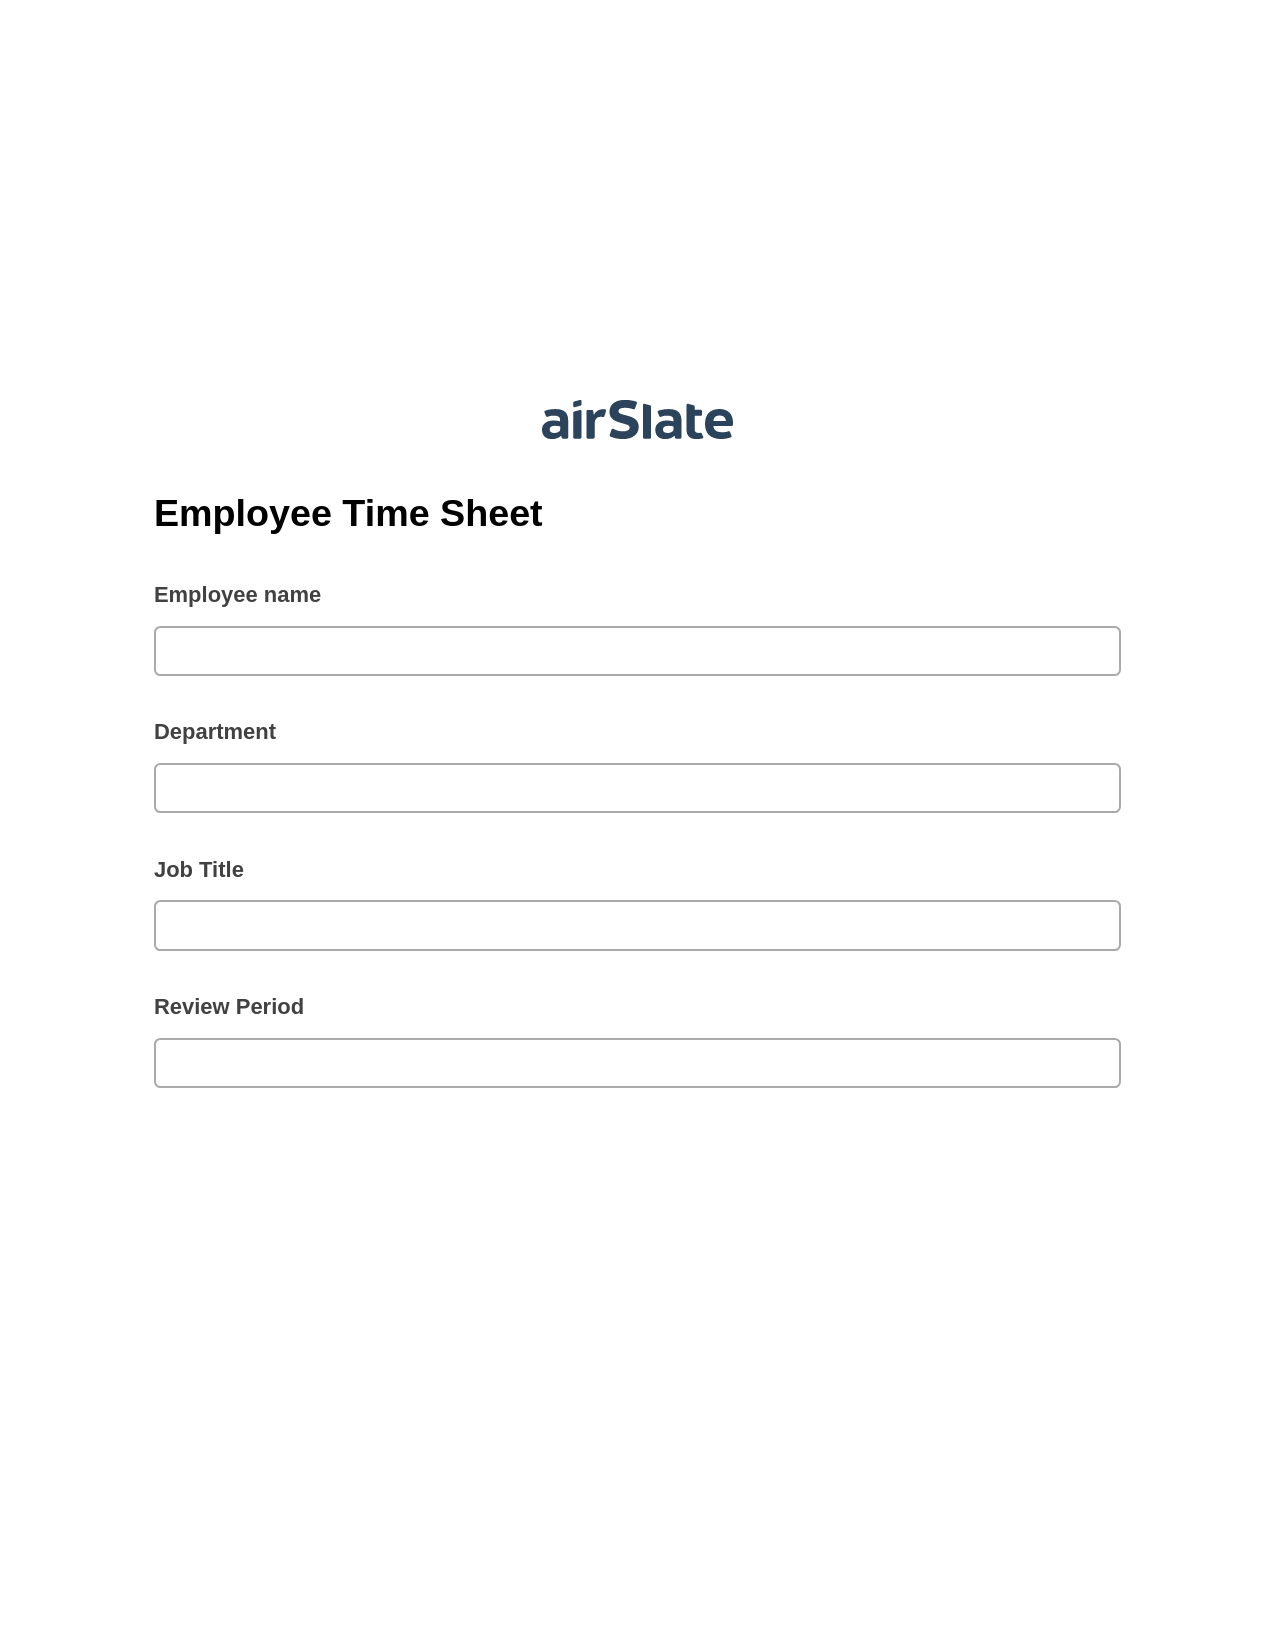 Employee Time Sheet Pre-fill Dropdowns from CSV file Bot, Create Salesforce Records Bot, Webhook Postfinish Bot